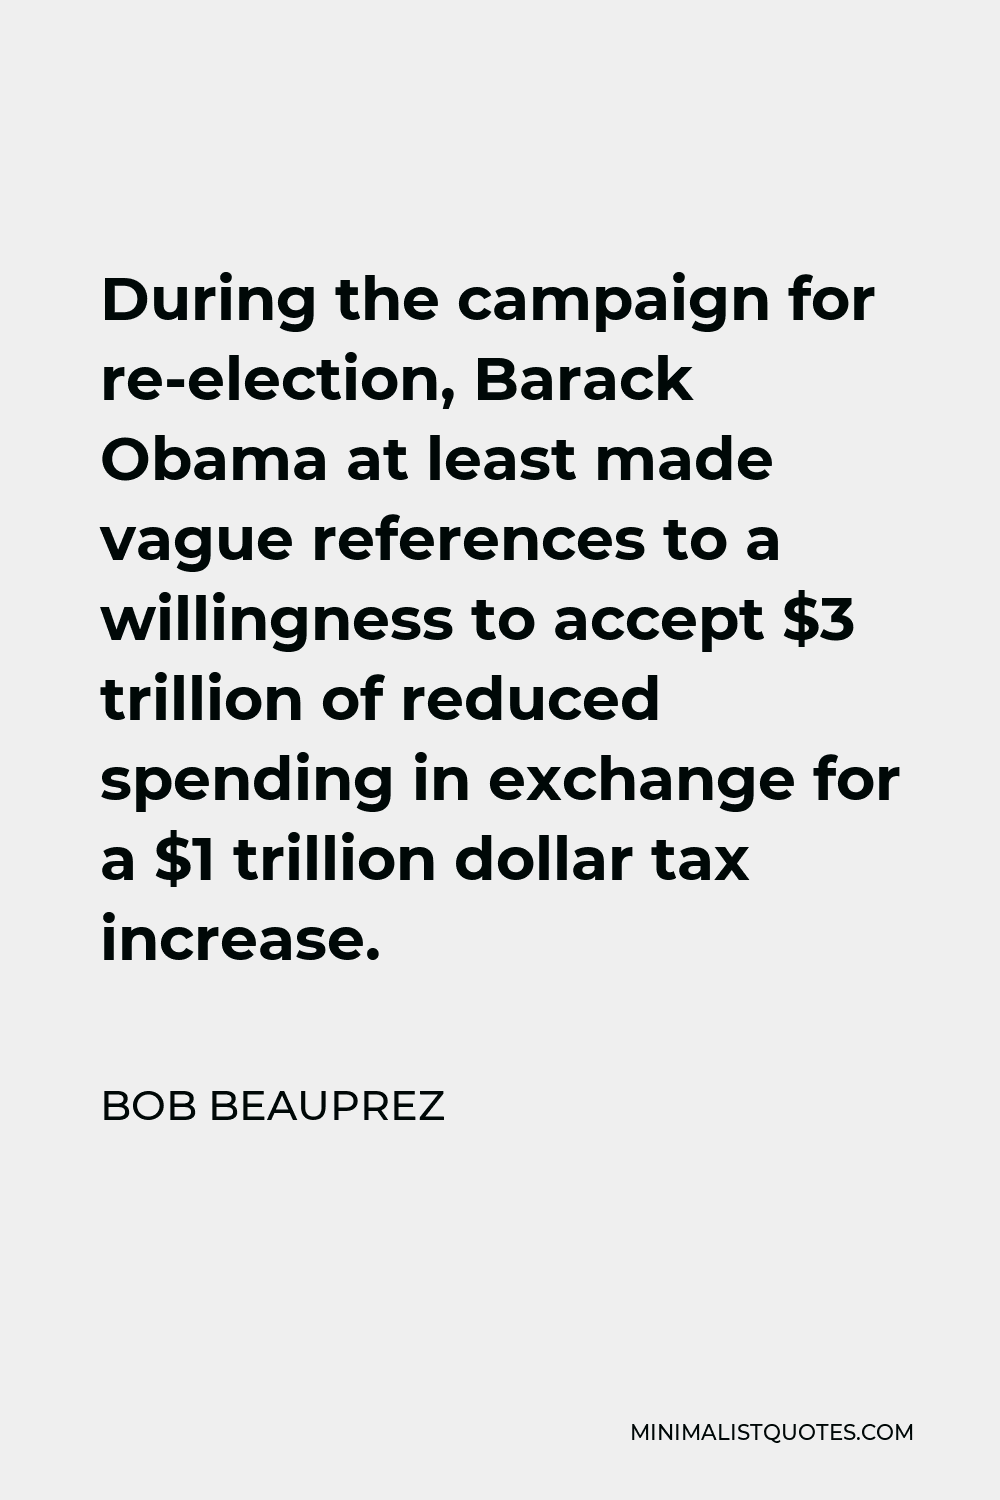 Bob Beauprez Quote - During the campaign for re-election, Barack Obama at least made vague references to a willingness to accept $3 trillion of reduced spending in exchange for a $1 trillion dollar tax increase.